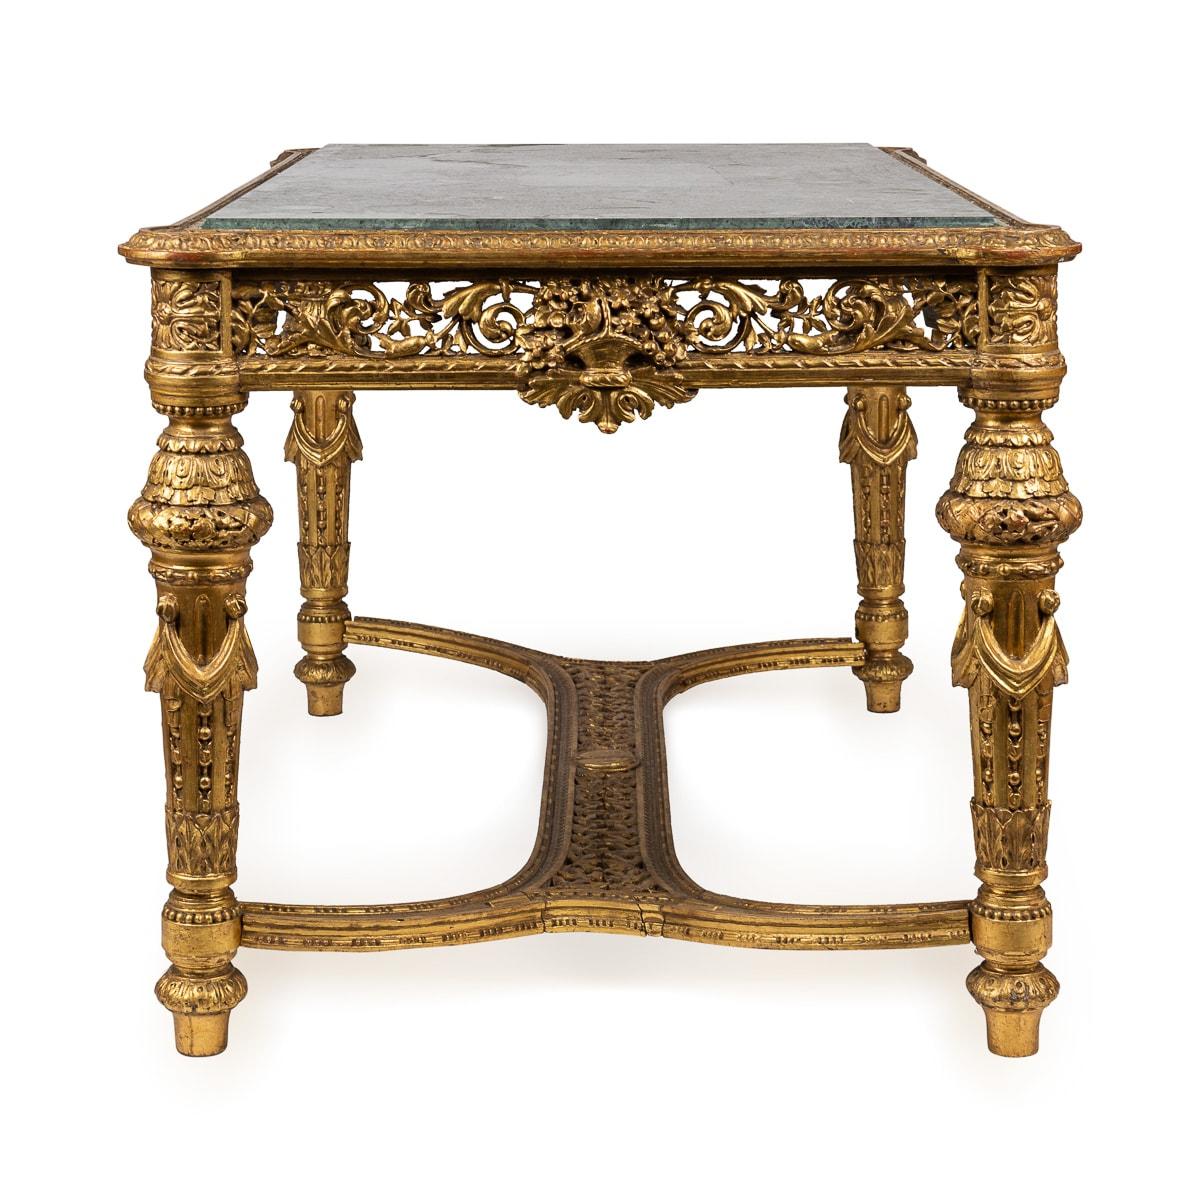 Late 19th Century 19th Century French Louis XVI Style Giltwood & Green Alp Marble Table c.1870 For Sale